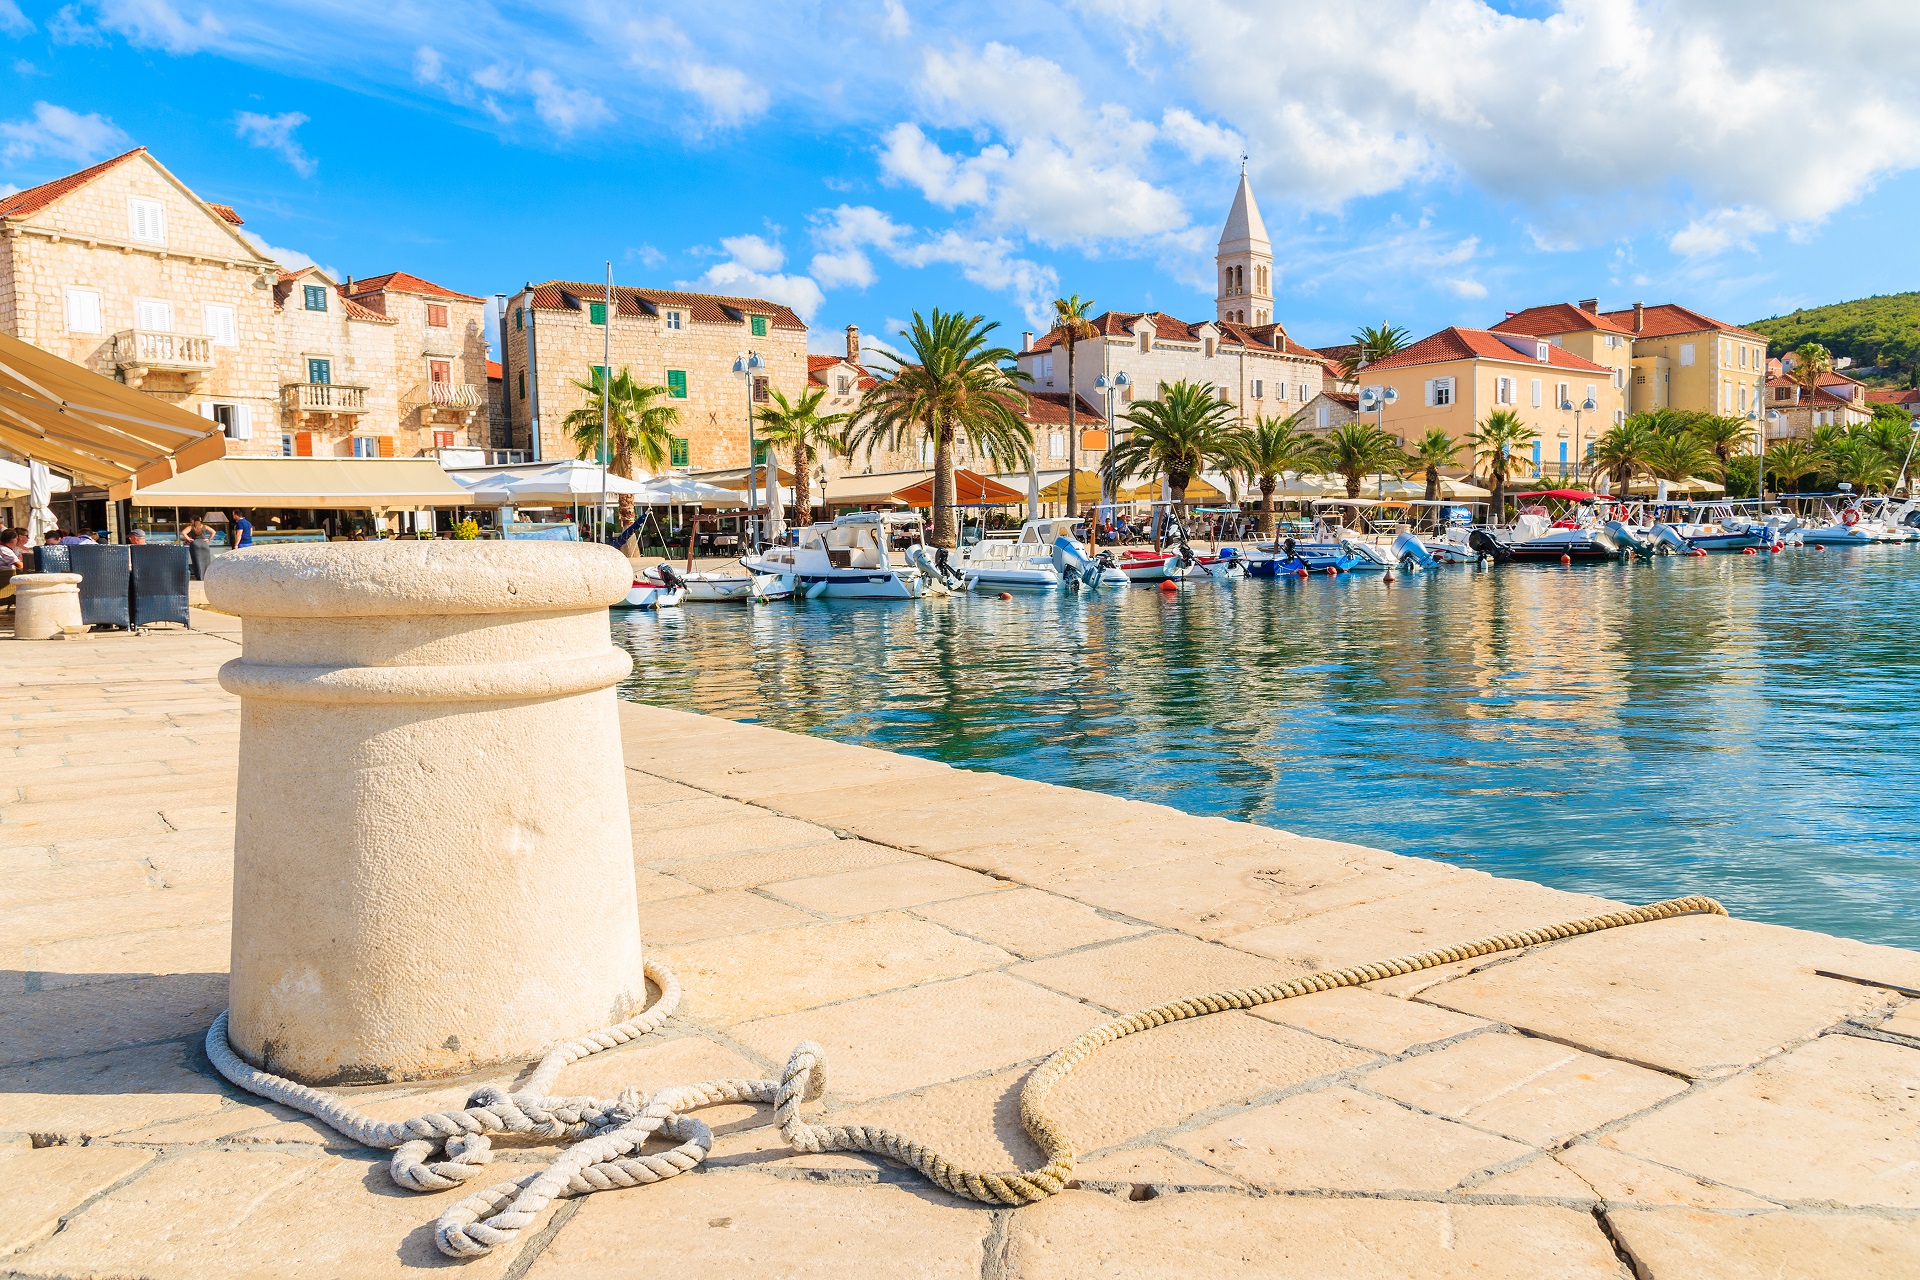 93136347 - pier in supetar port with colorful houses and boats, brac island, croatia